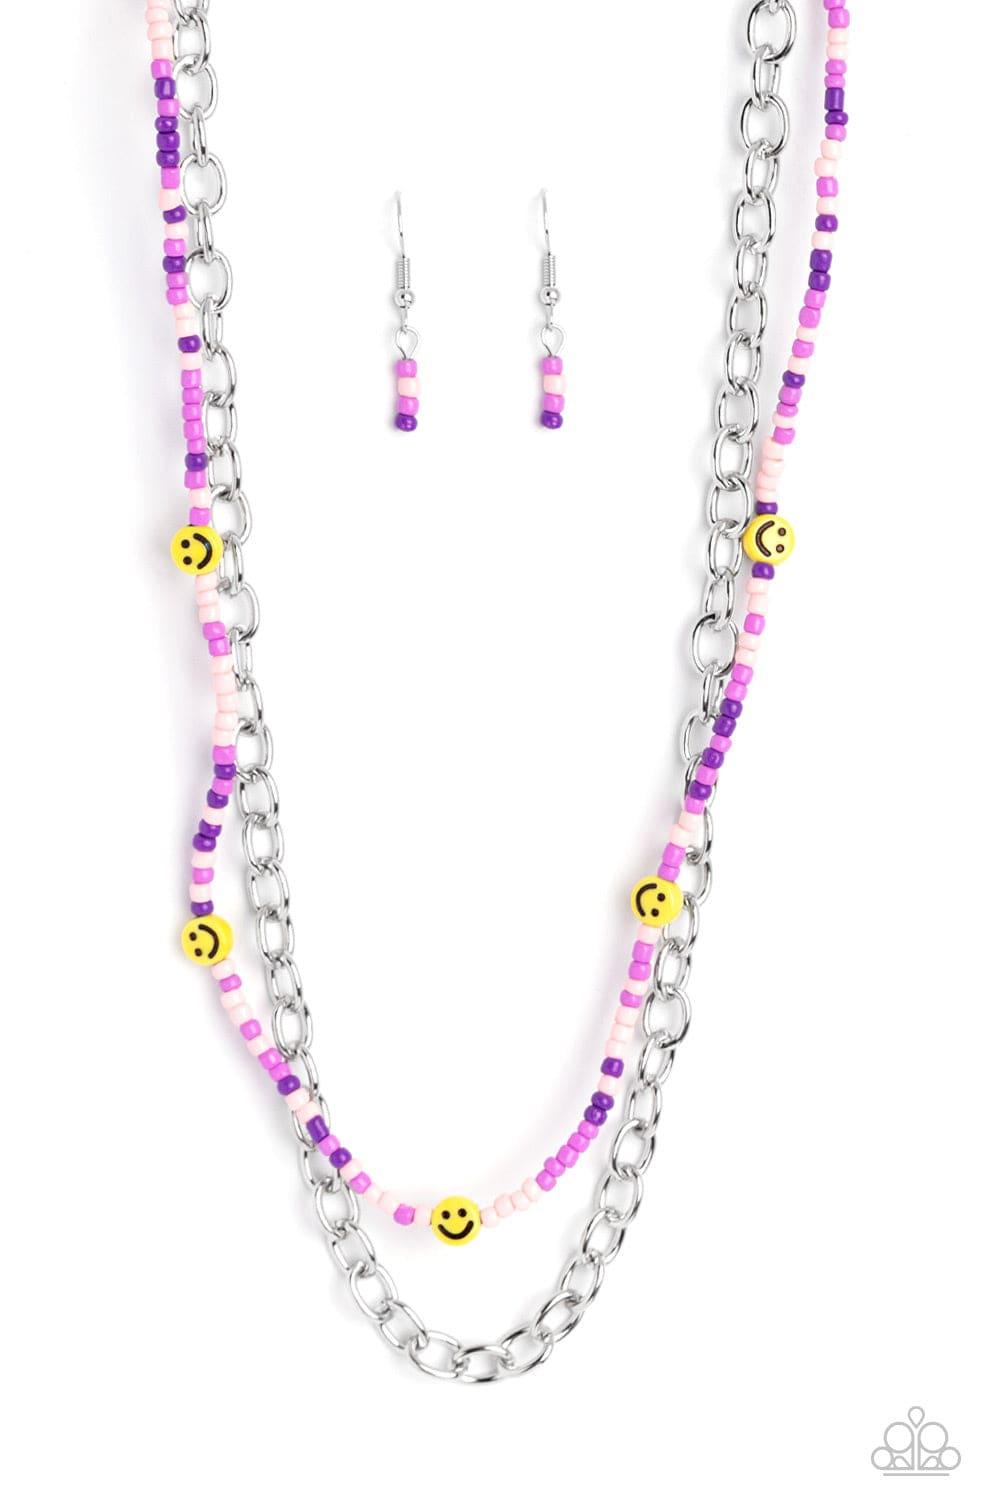 Paparazzi Accessories - Happy Looks Good On You - Purple Necklace - Bling by JessieK